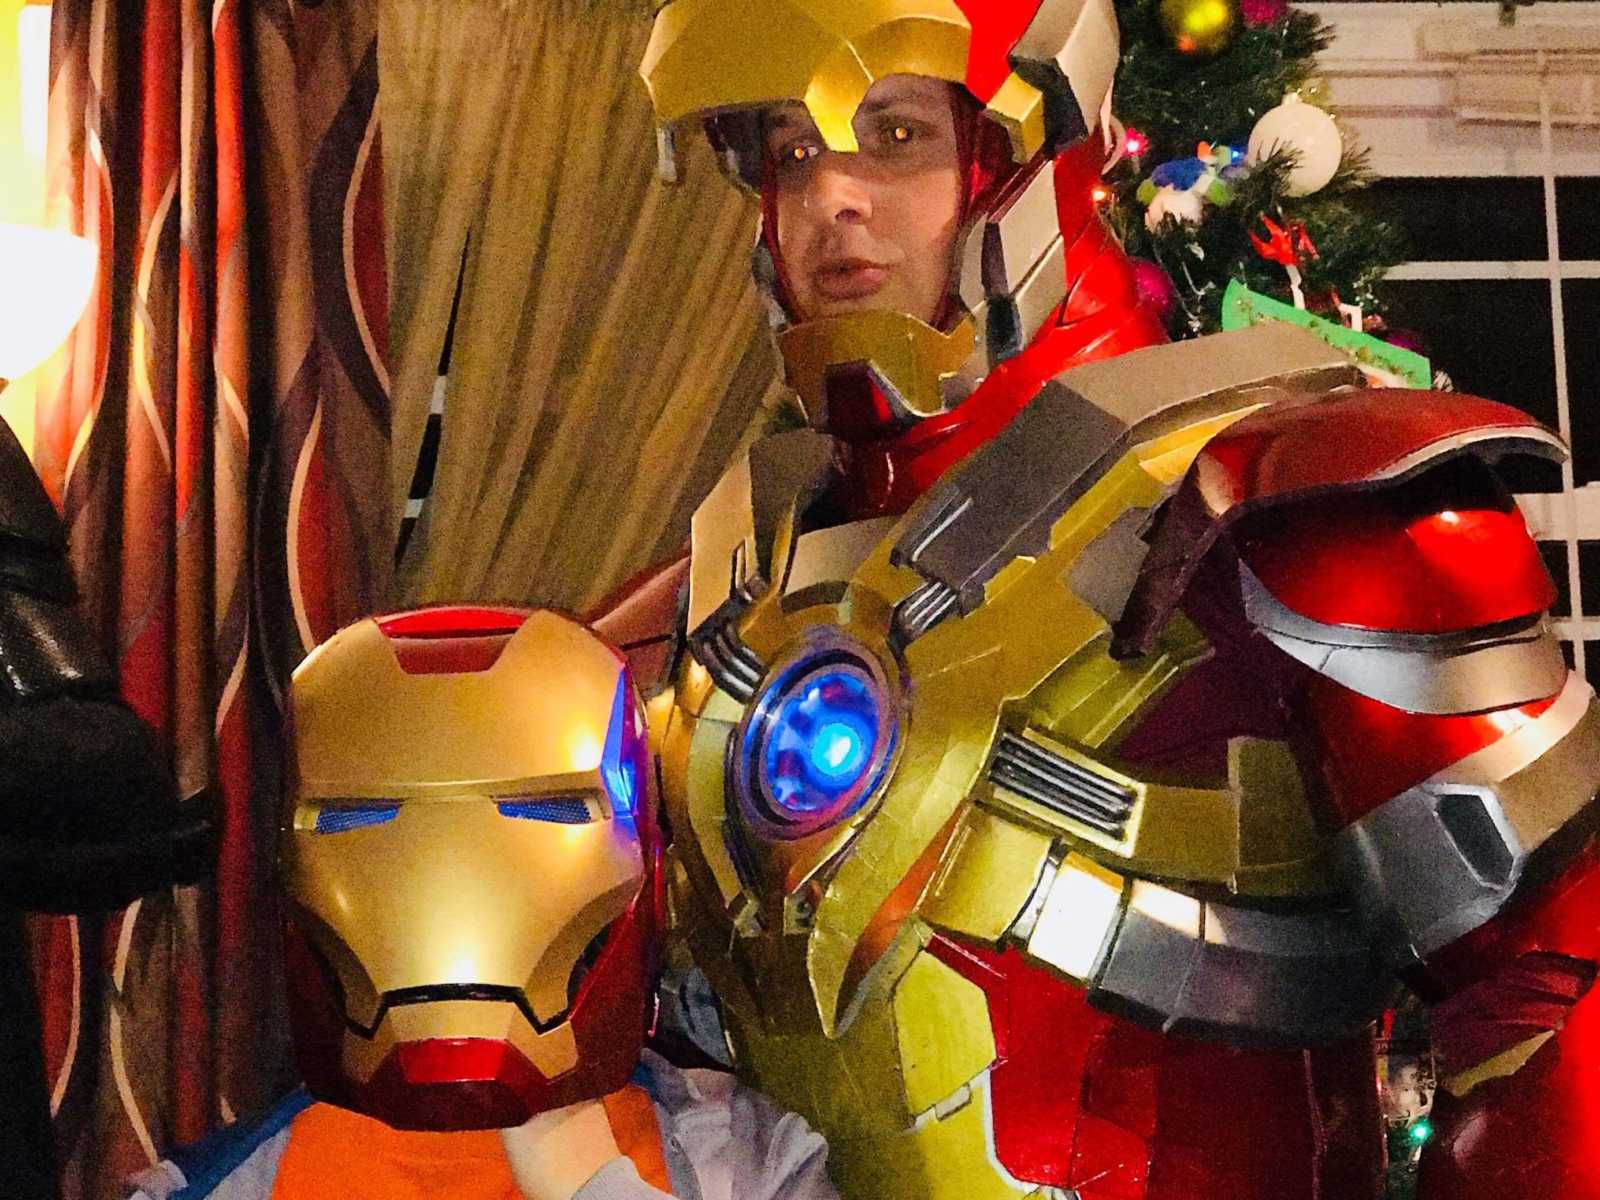 Man in iron man suit stand next to boy with cancer who has iron man helmet on